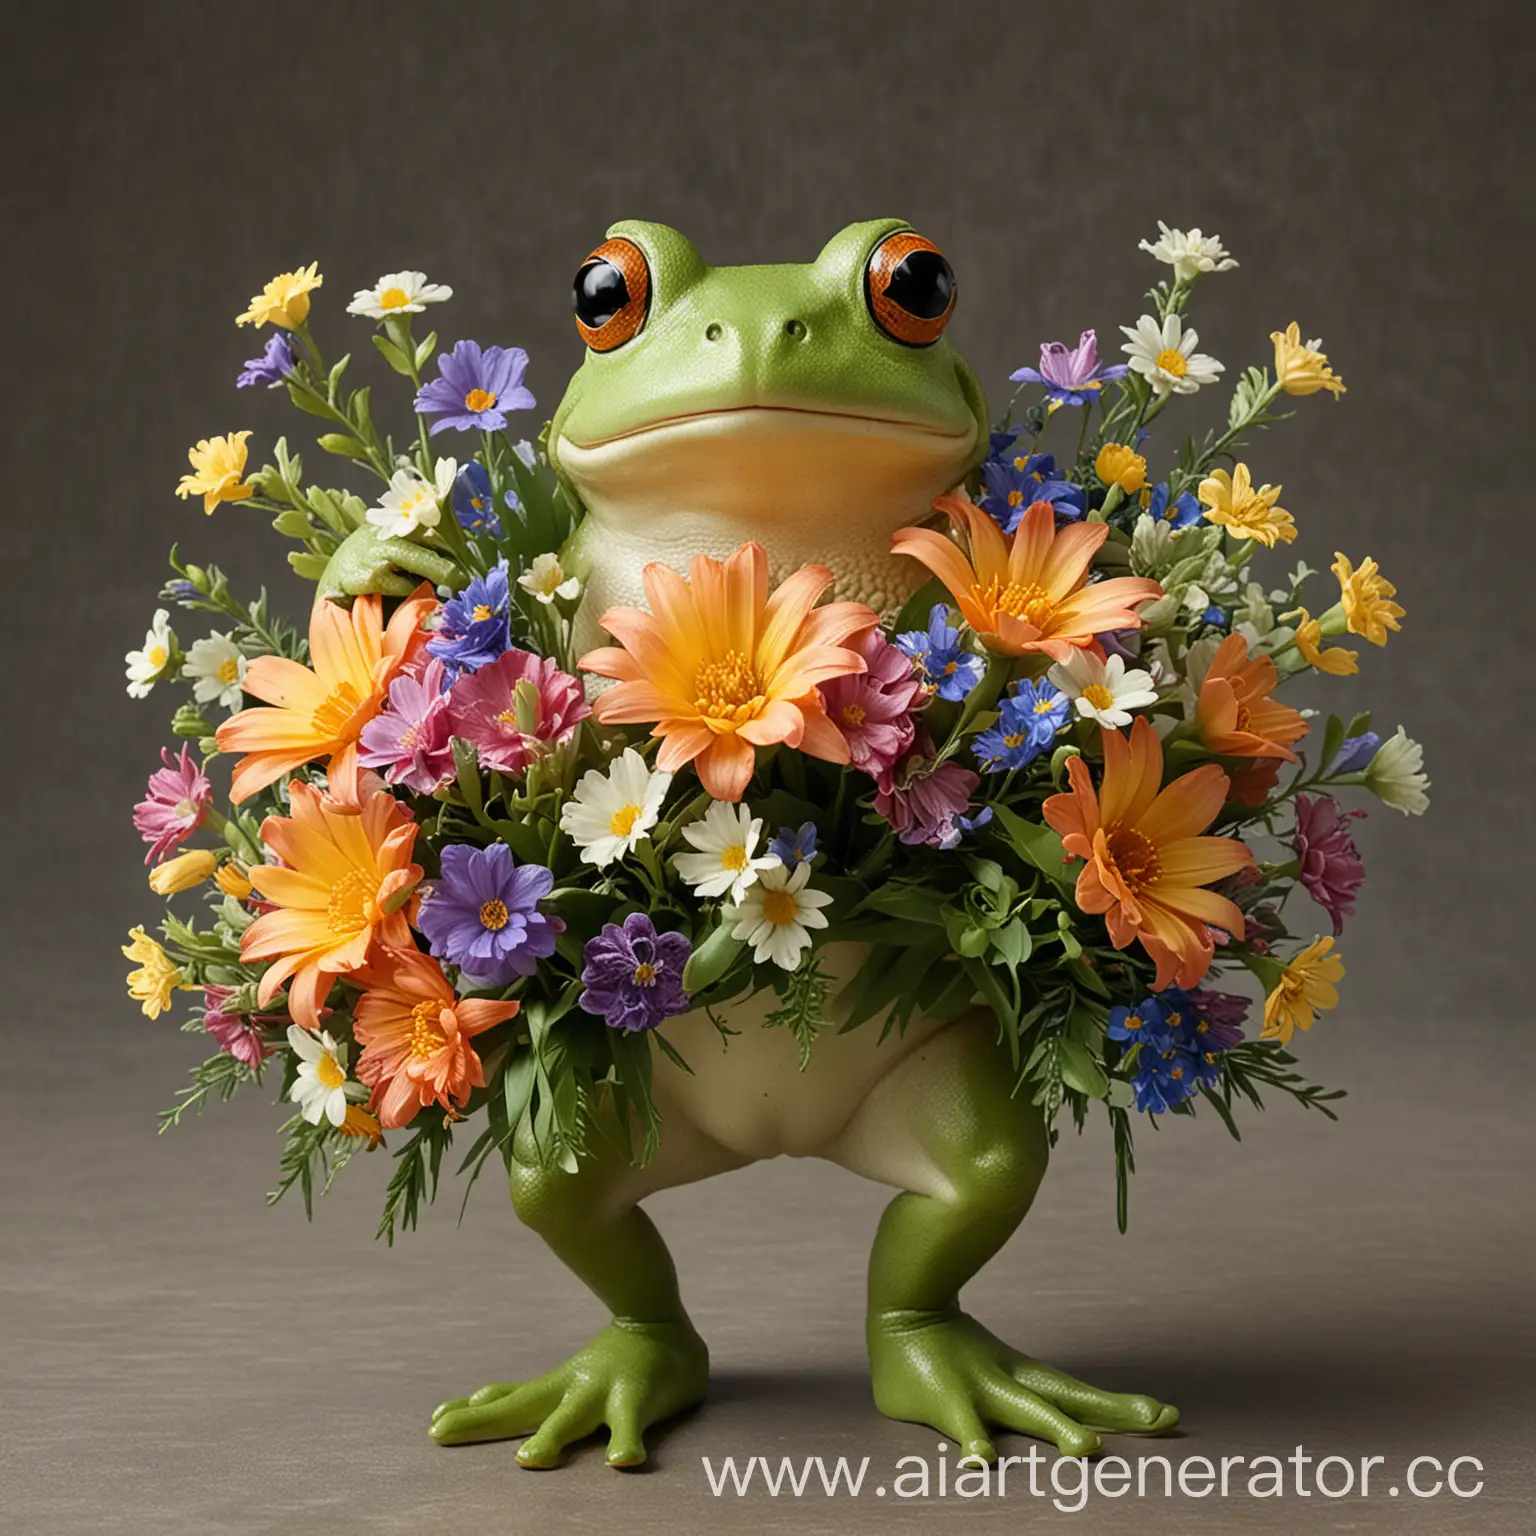 Colorful-Frog-Holding-a-Bouquet-of-Flowers